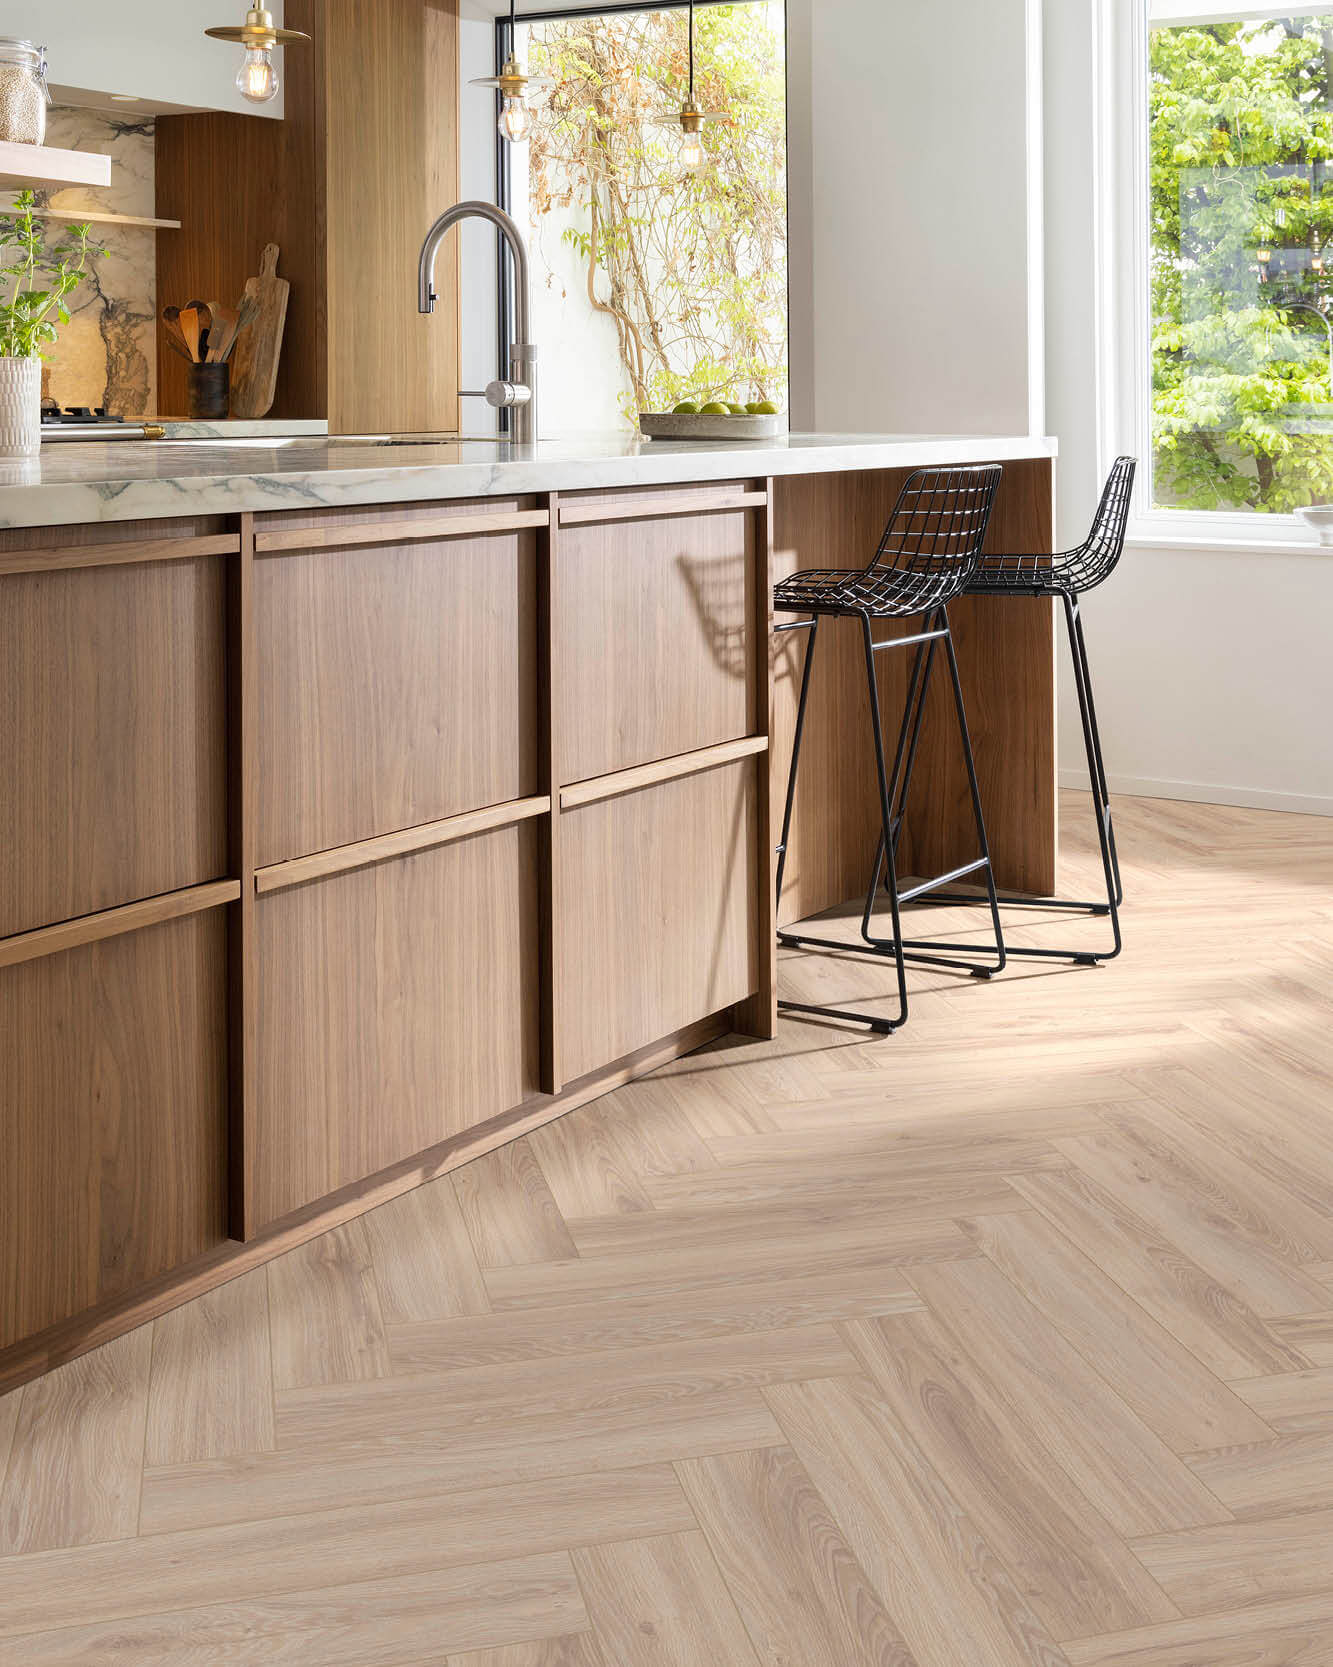 Herringbone A Timeless Design Floor For Any Room In Your House Moduleo